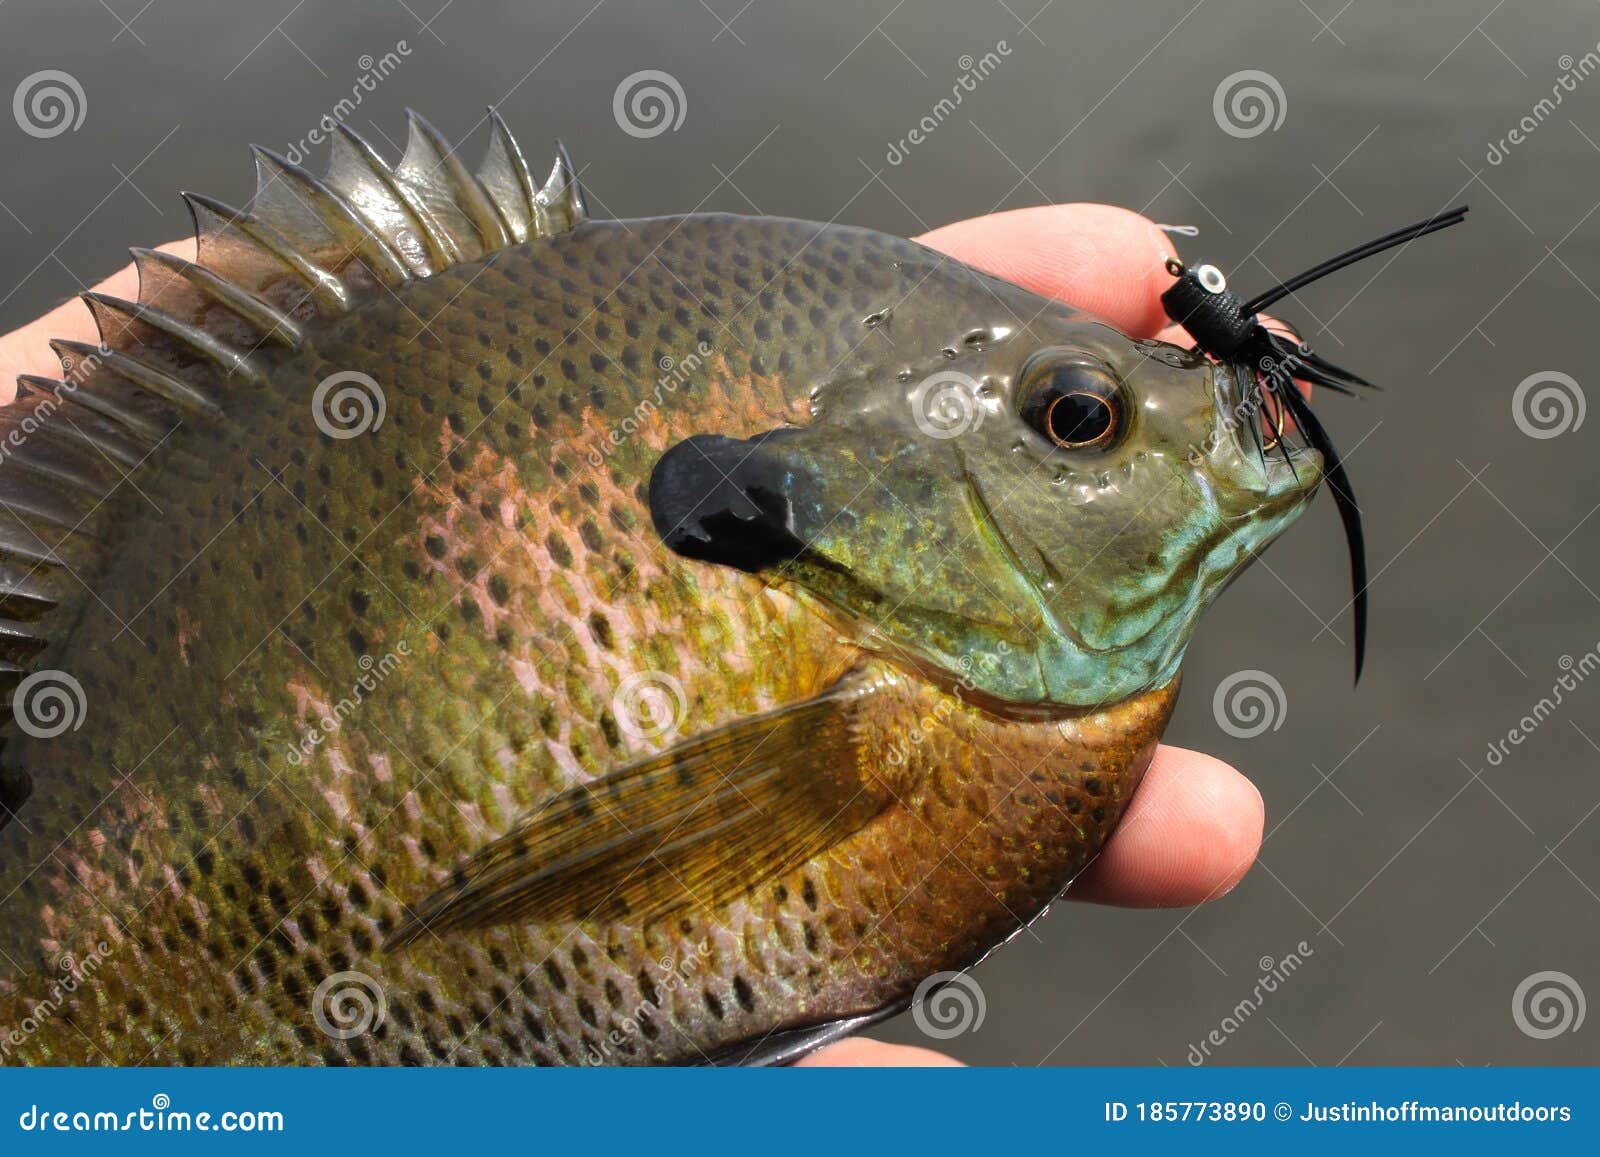 Bluegill Panfish Caught Fly Fishing Stock Photo - Image of scales